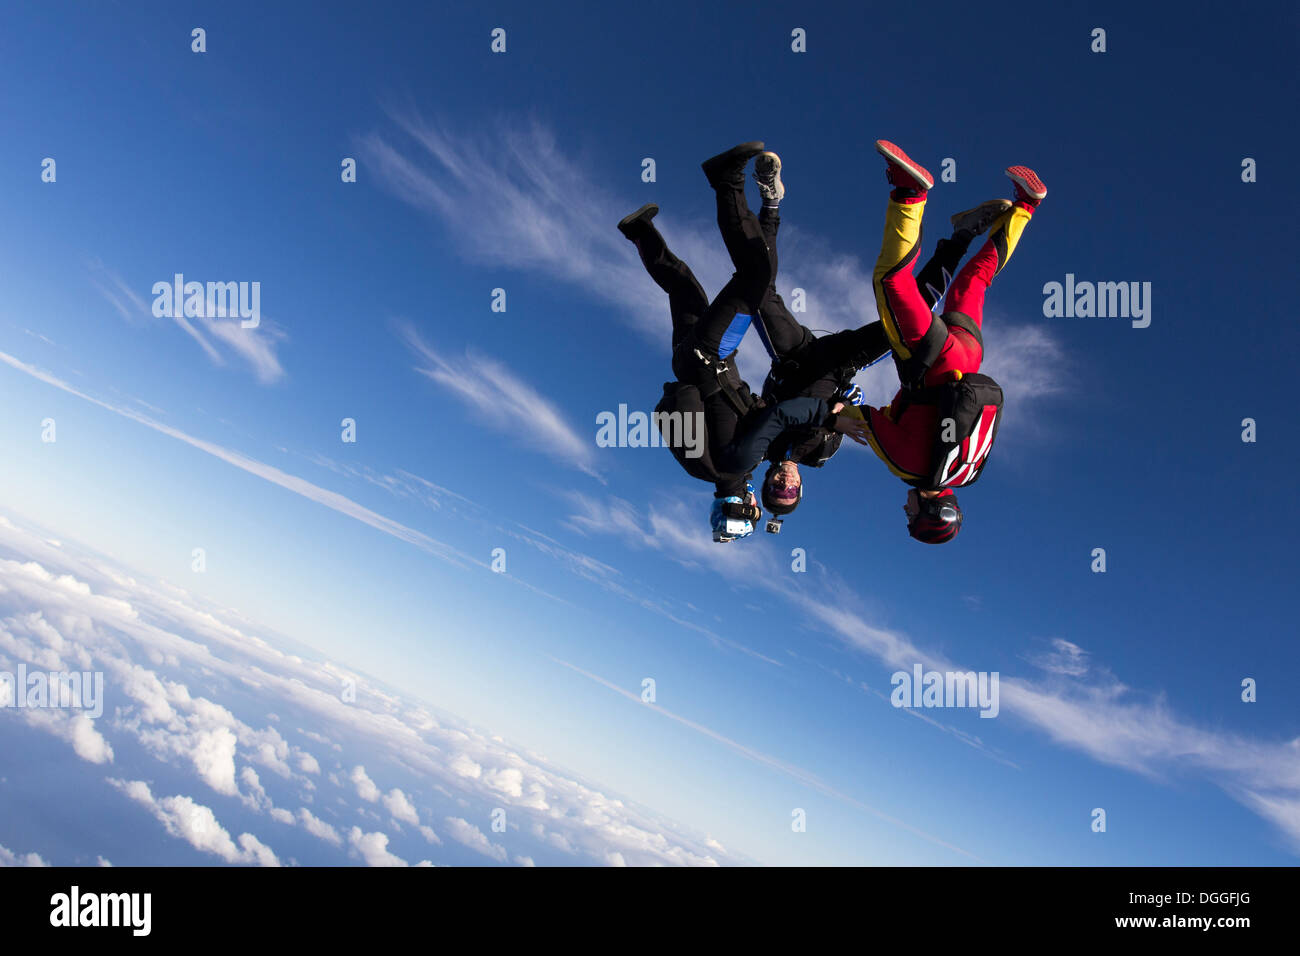 Formation skydivers free falling upside down Stock Photo